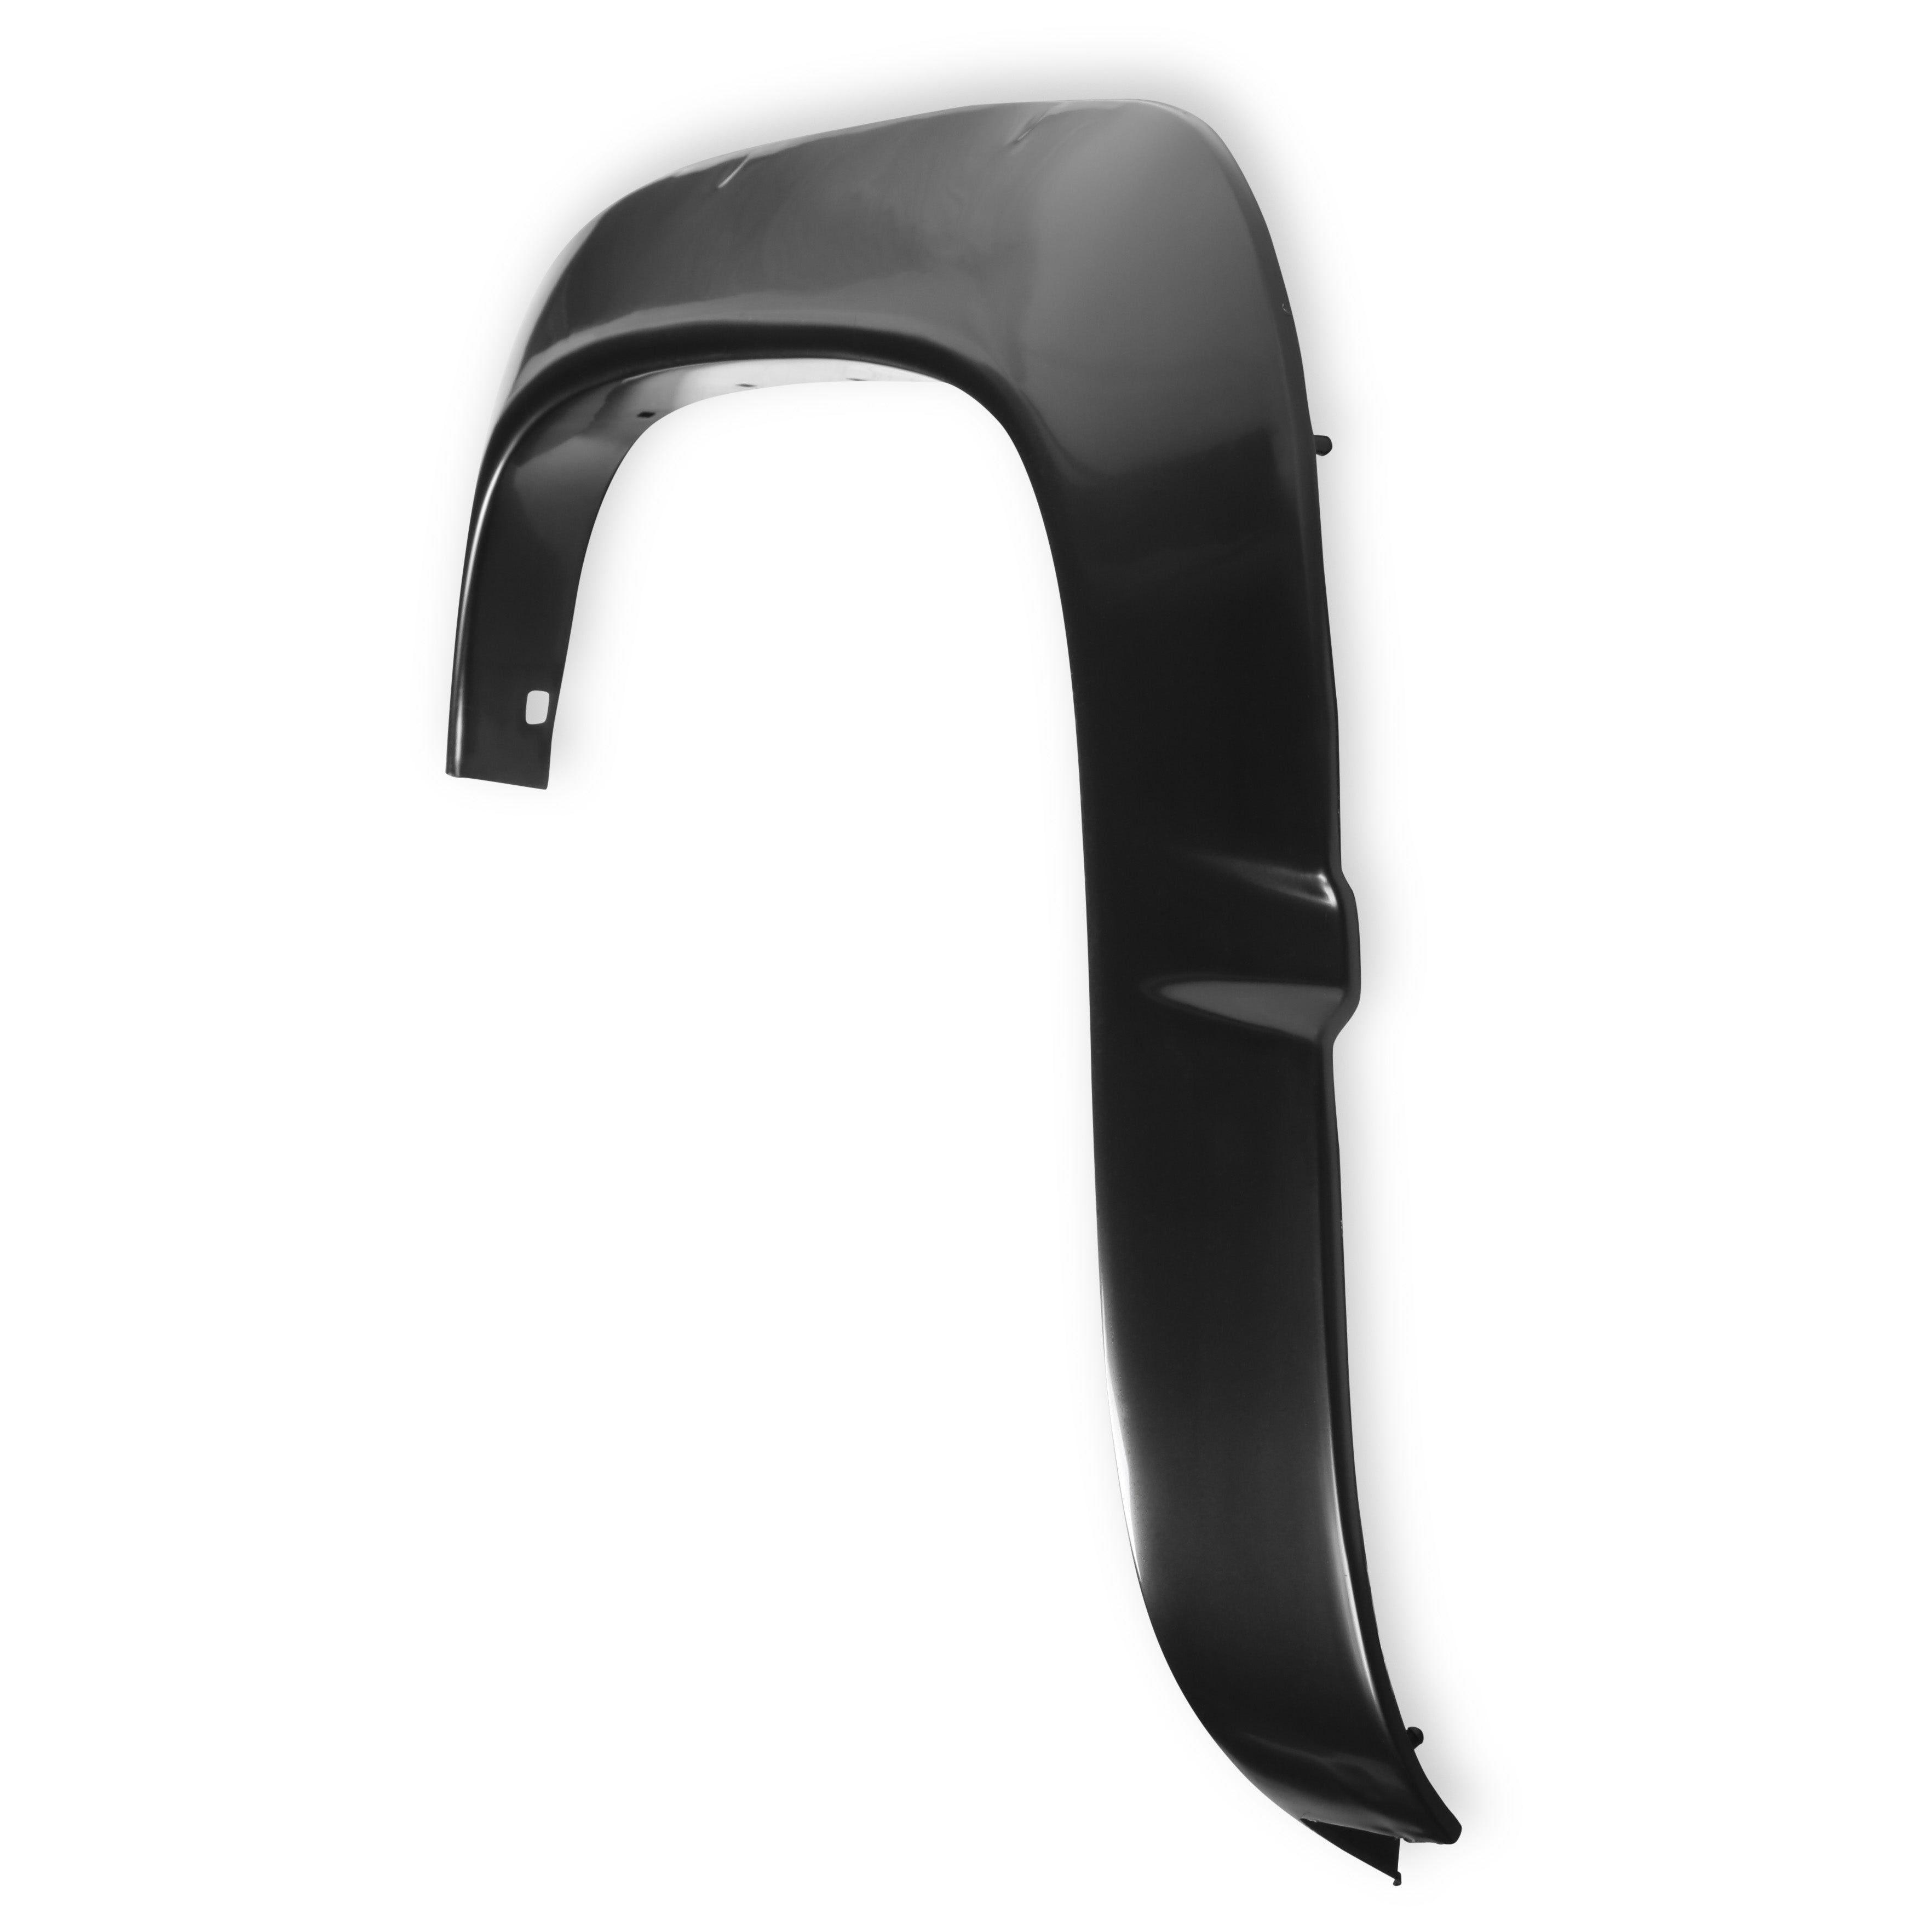 BROTHERS GMT400 Front Fender Flare - LH pn 04-442